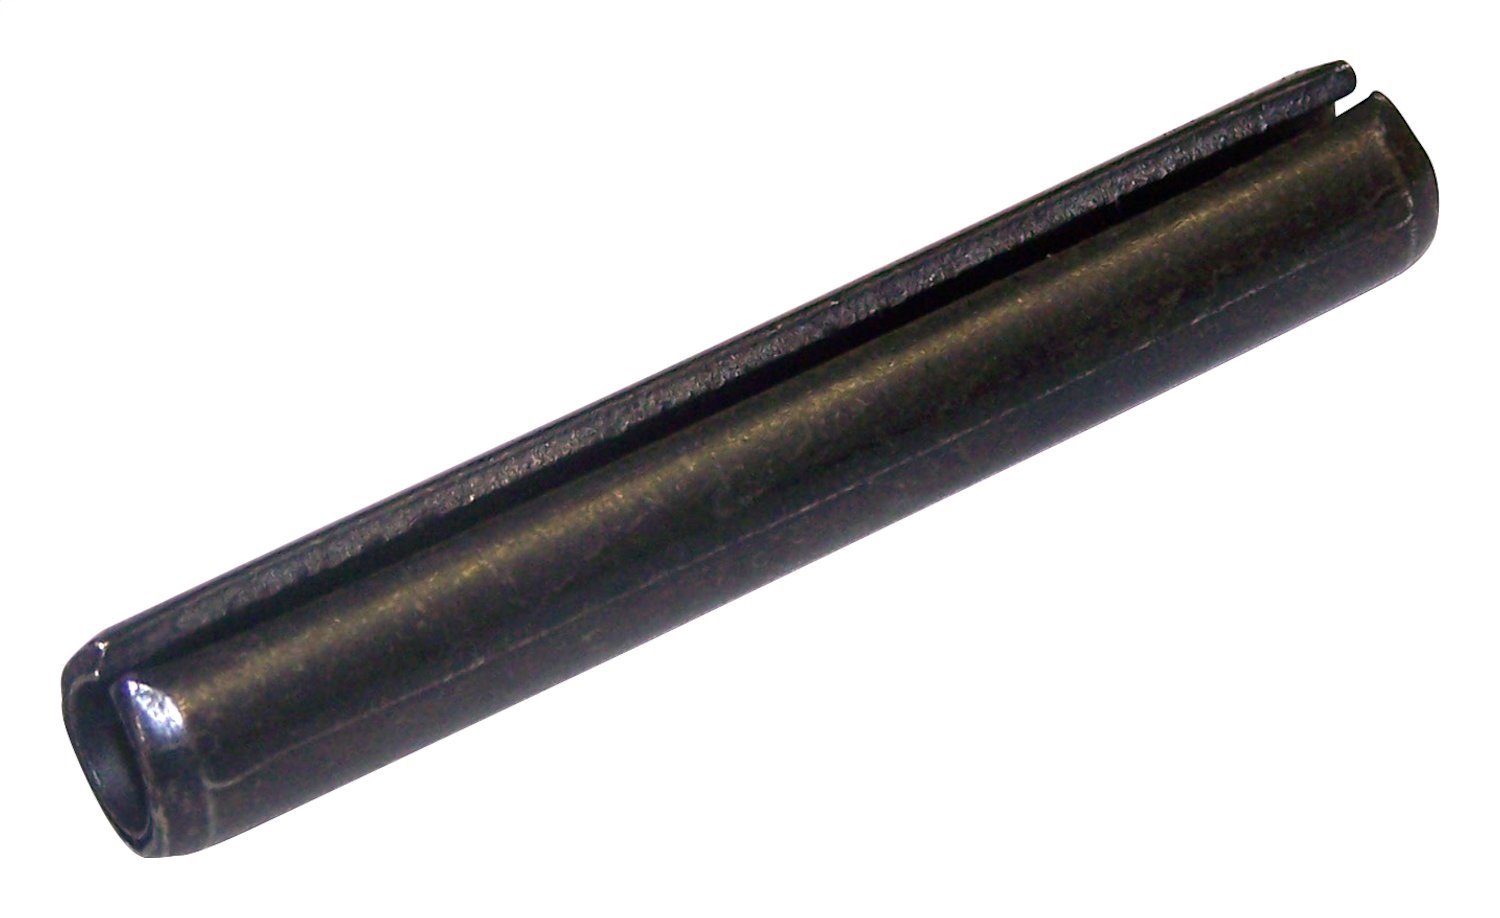 Differential Shaft Pin